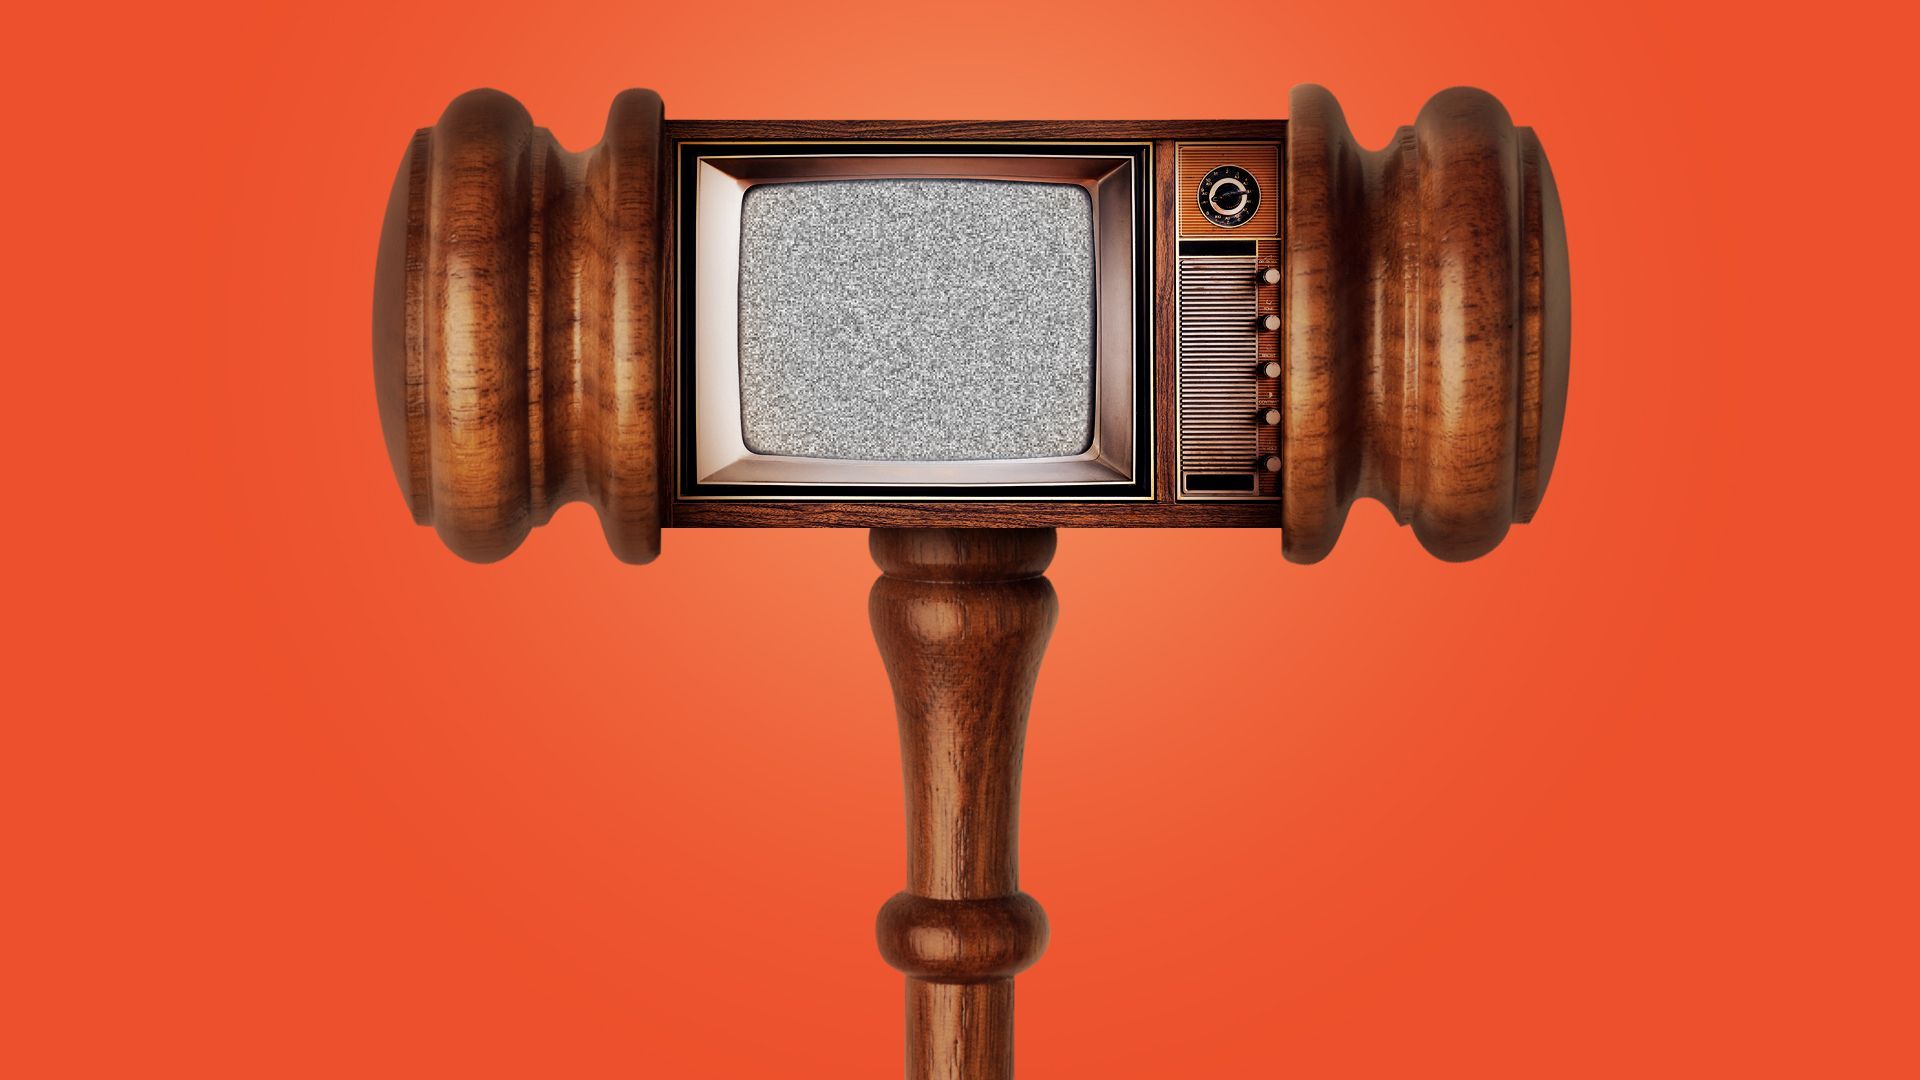 Illustration of a gavel with the center being a staticky TV